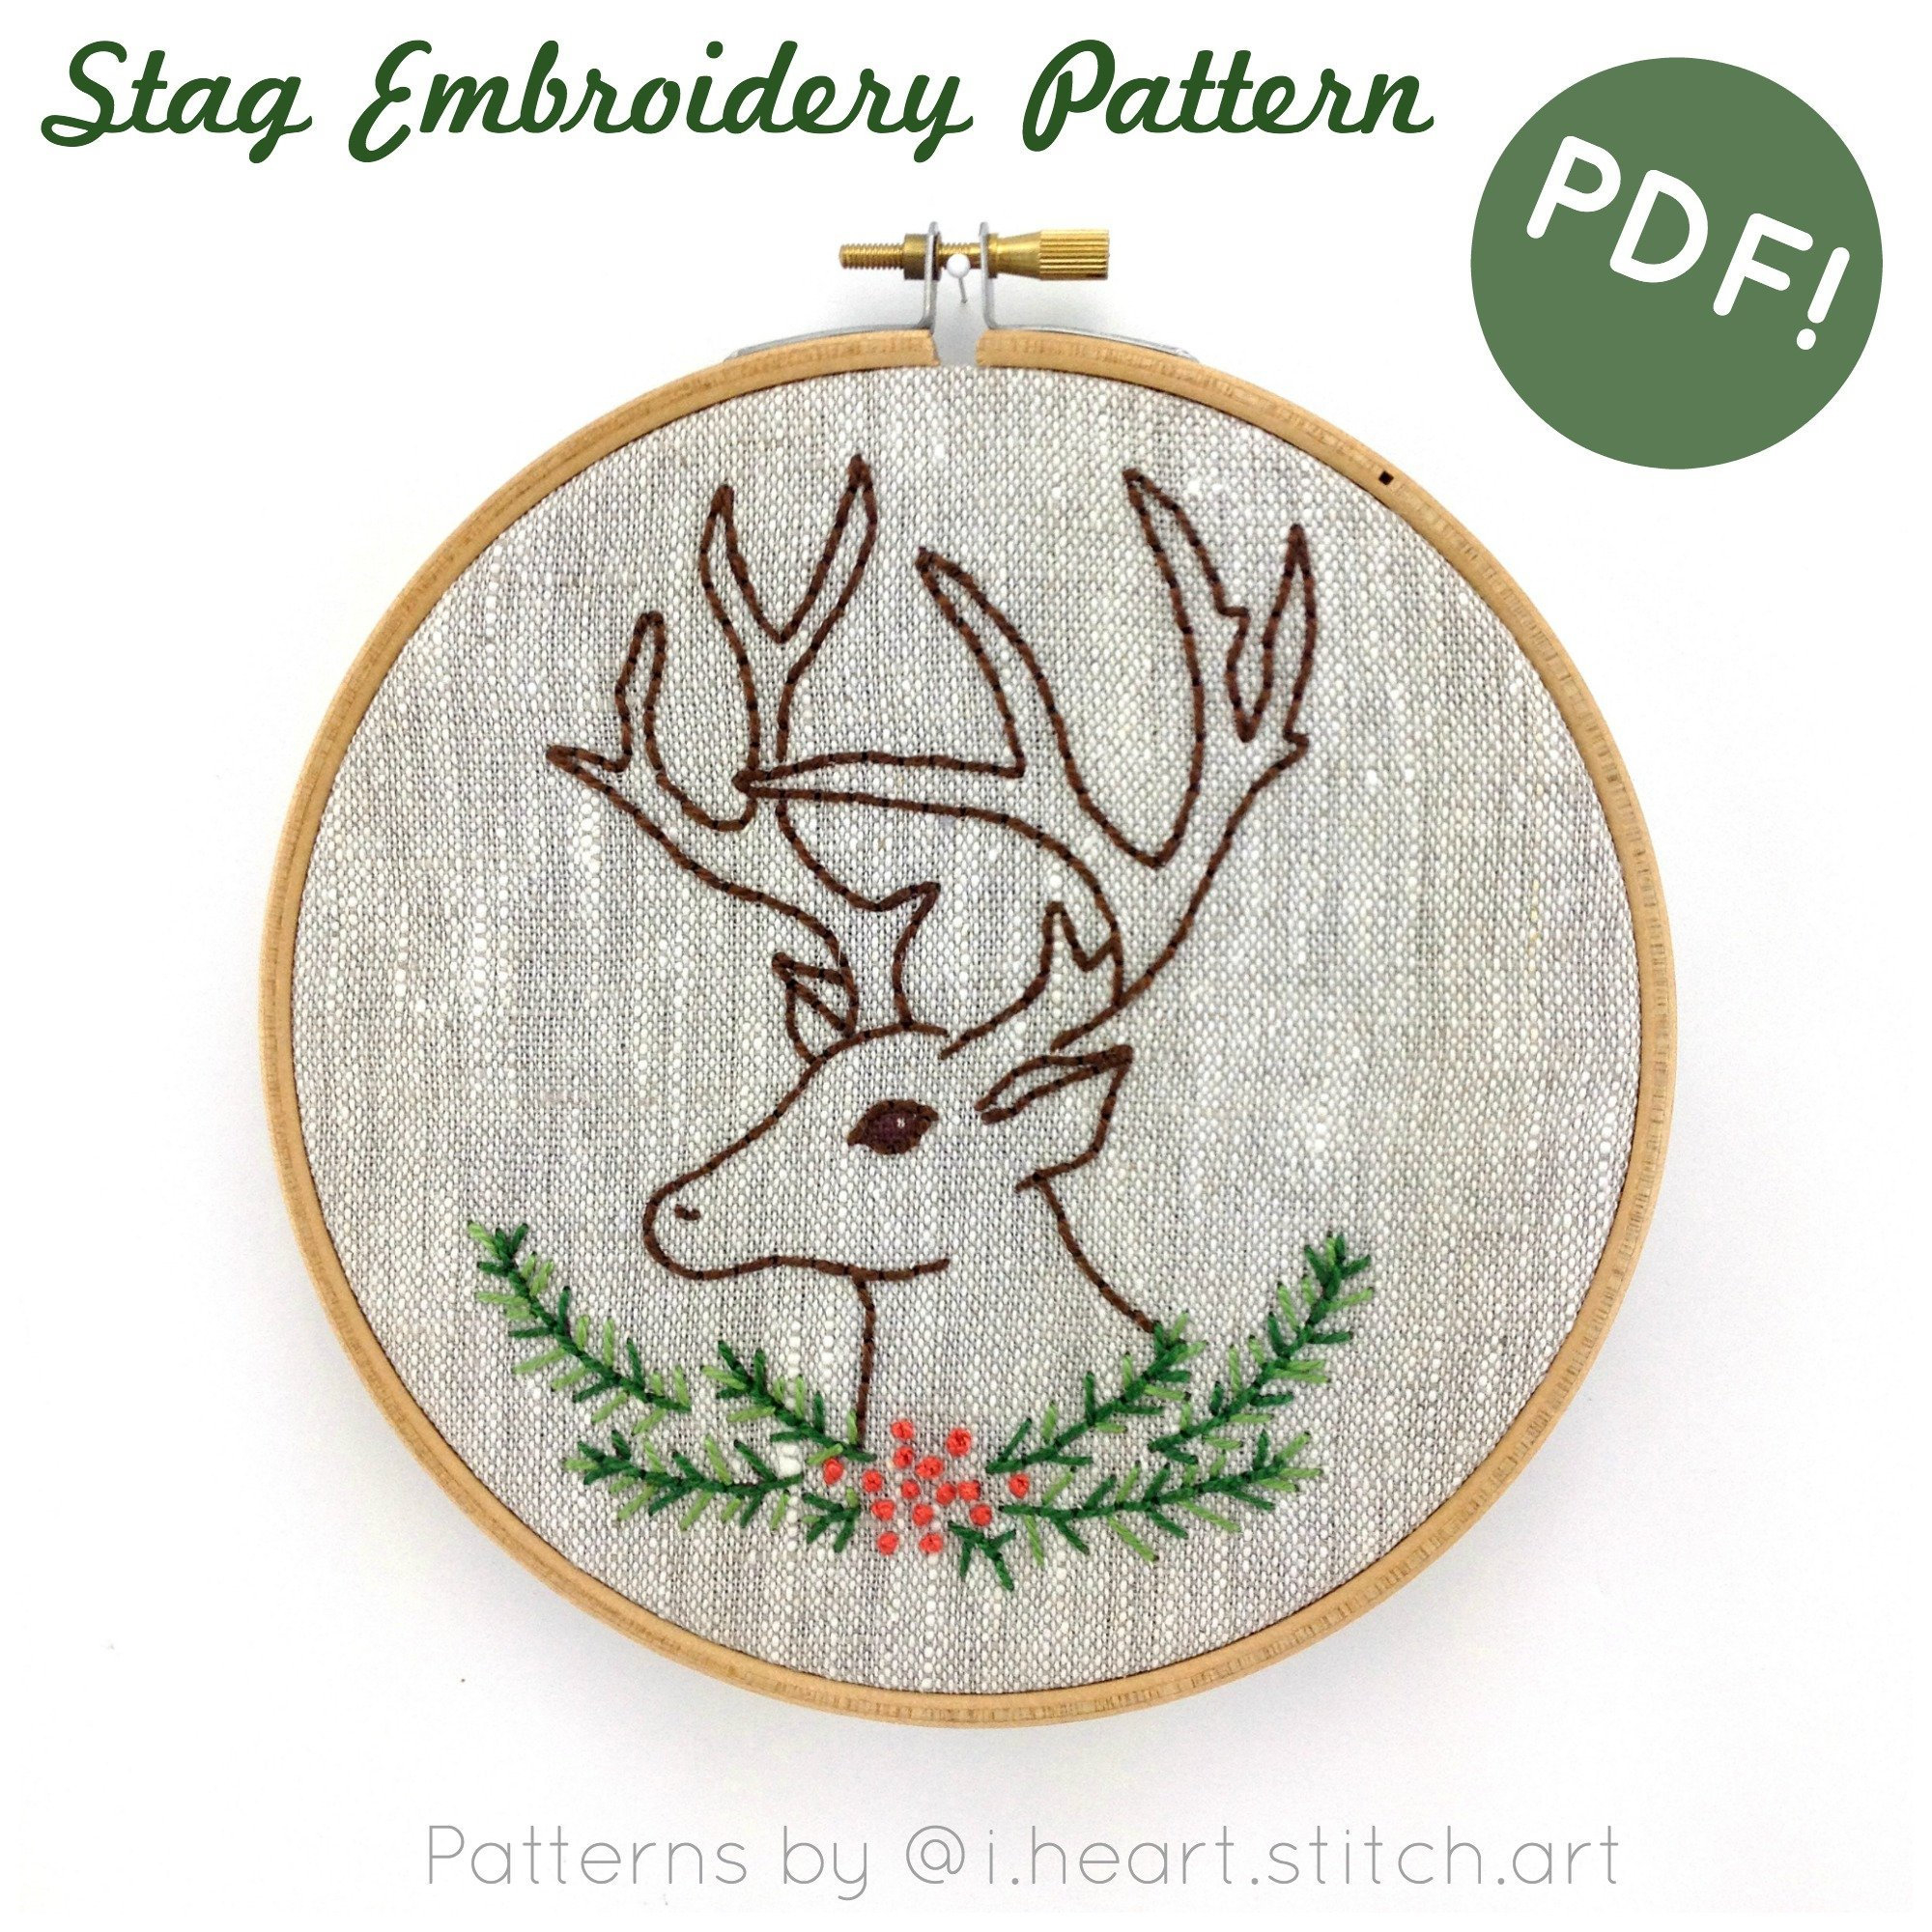 How To Create Embroidery Patterns Stag Embroidery Pattern Digital Download